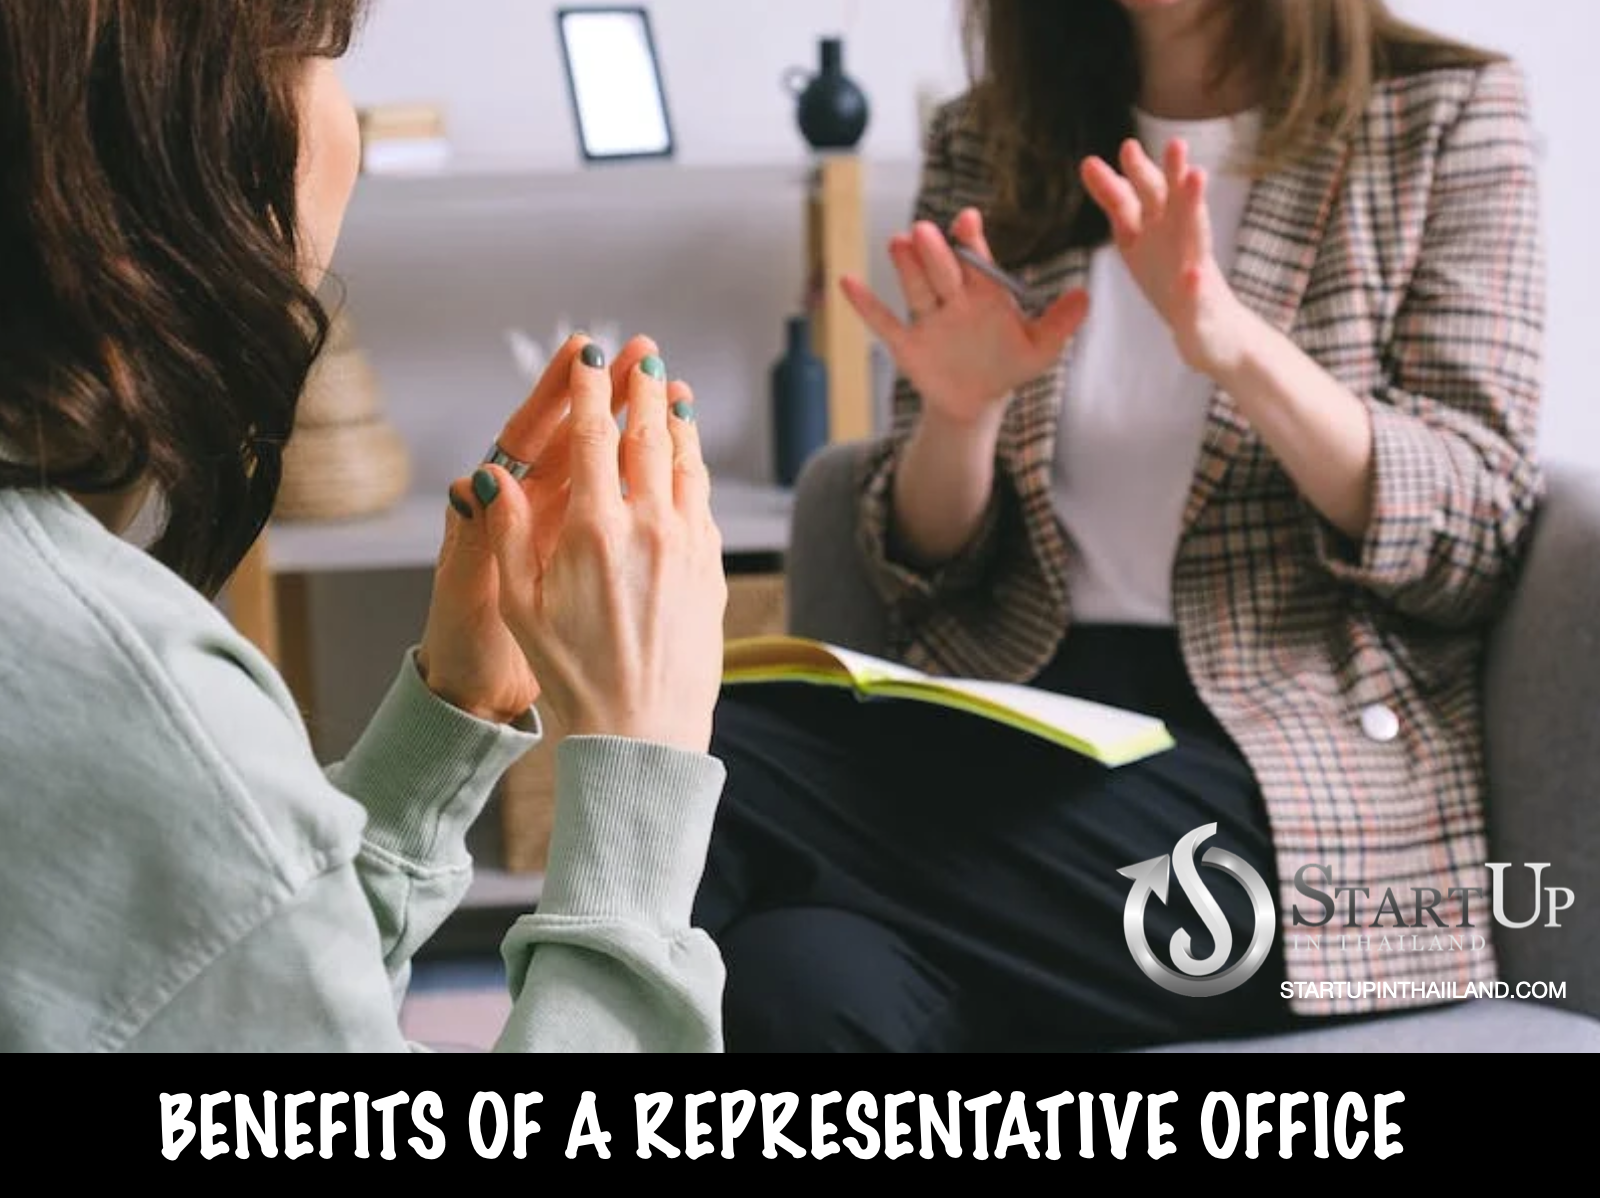 You are currently viewing Maximizing Your Business in Thailand: Exploring the Benefits of a Representative Office